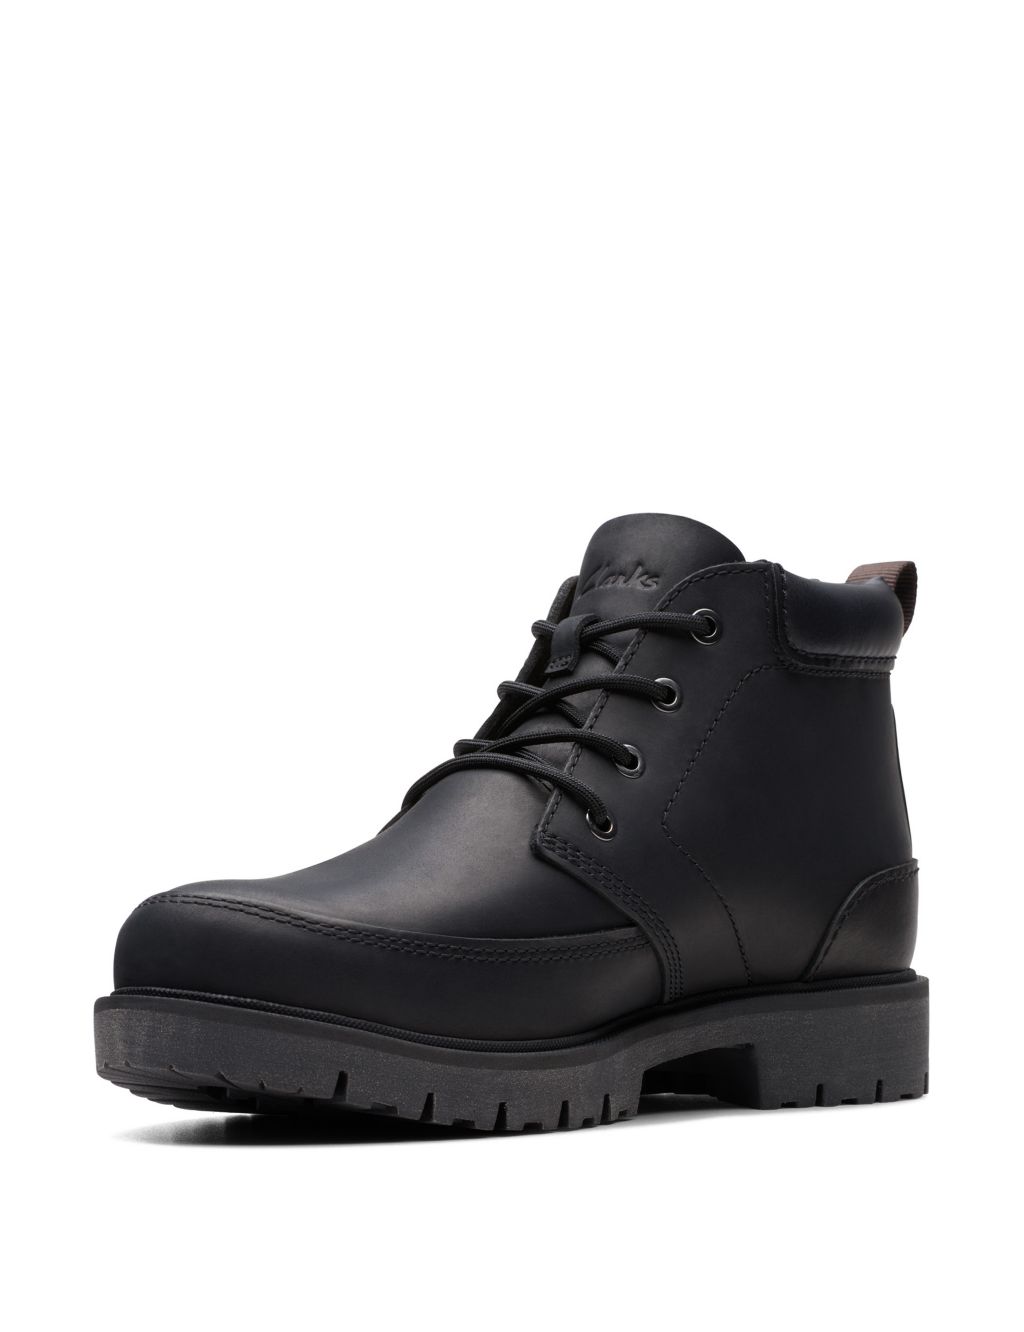 Leather Casual Boots image 4